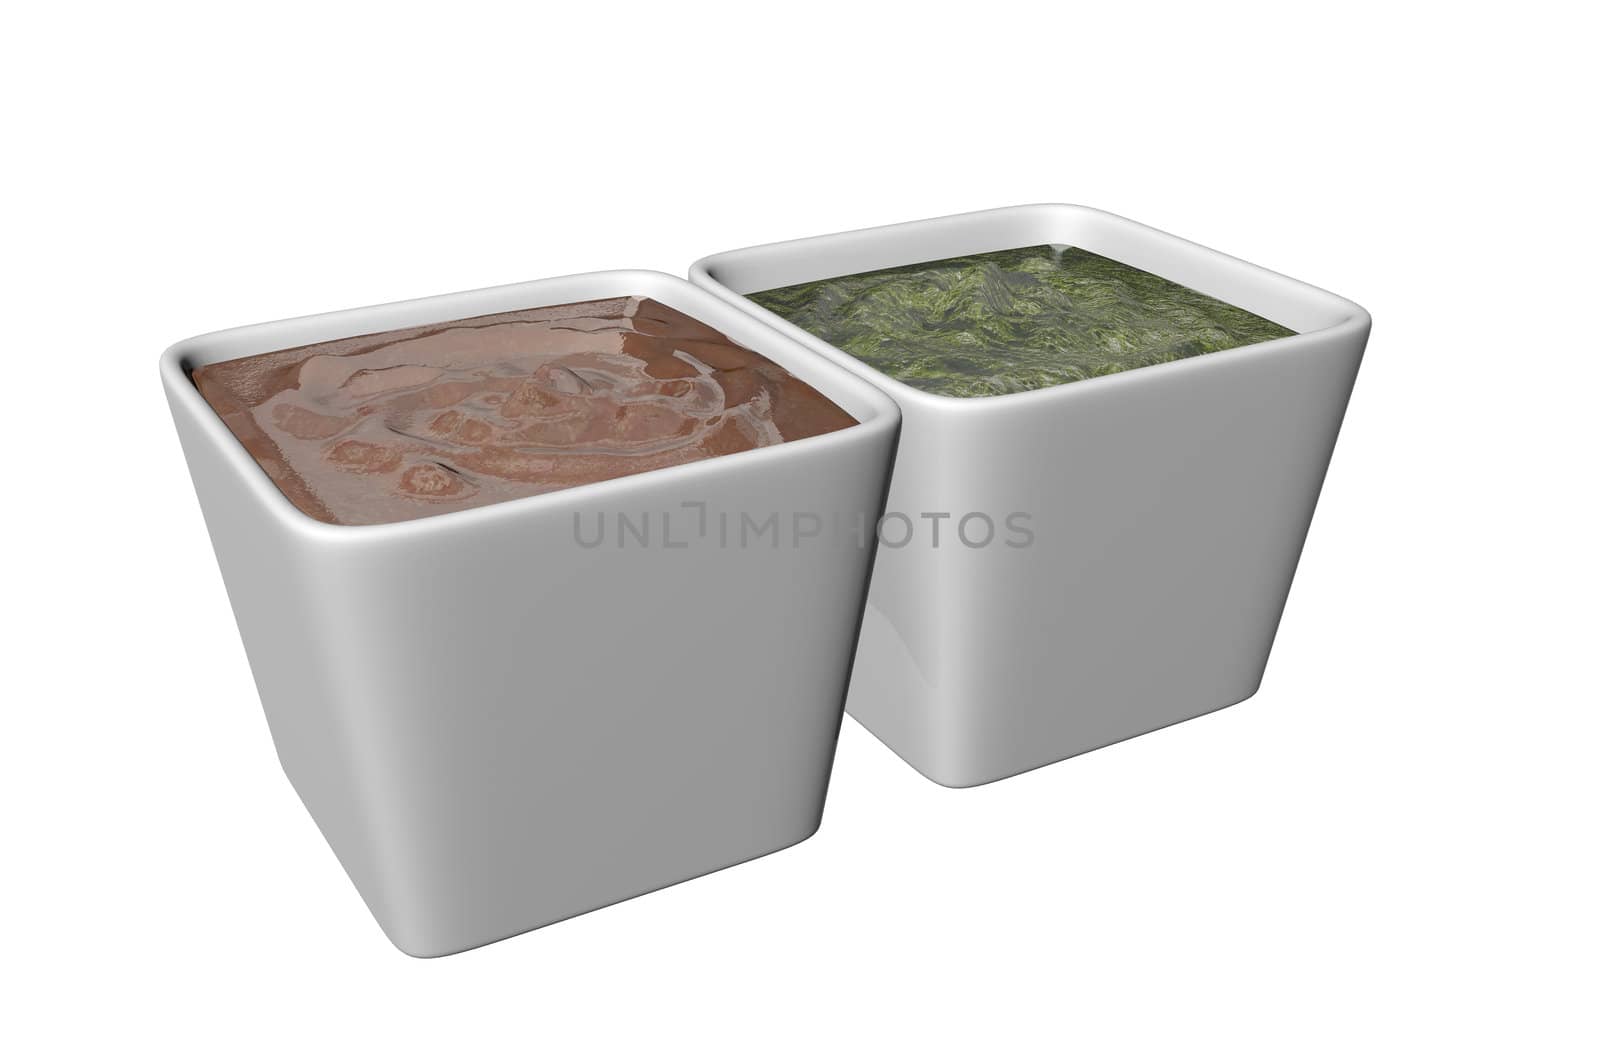 Ceramic square shaped dipping bowls with brown and green sauces, by Morphart